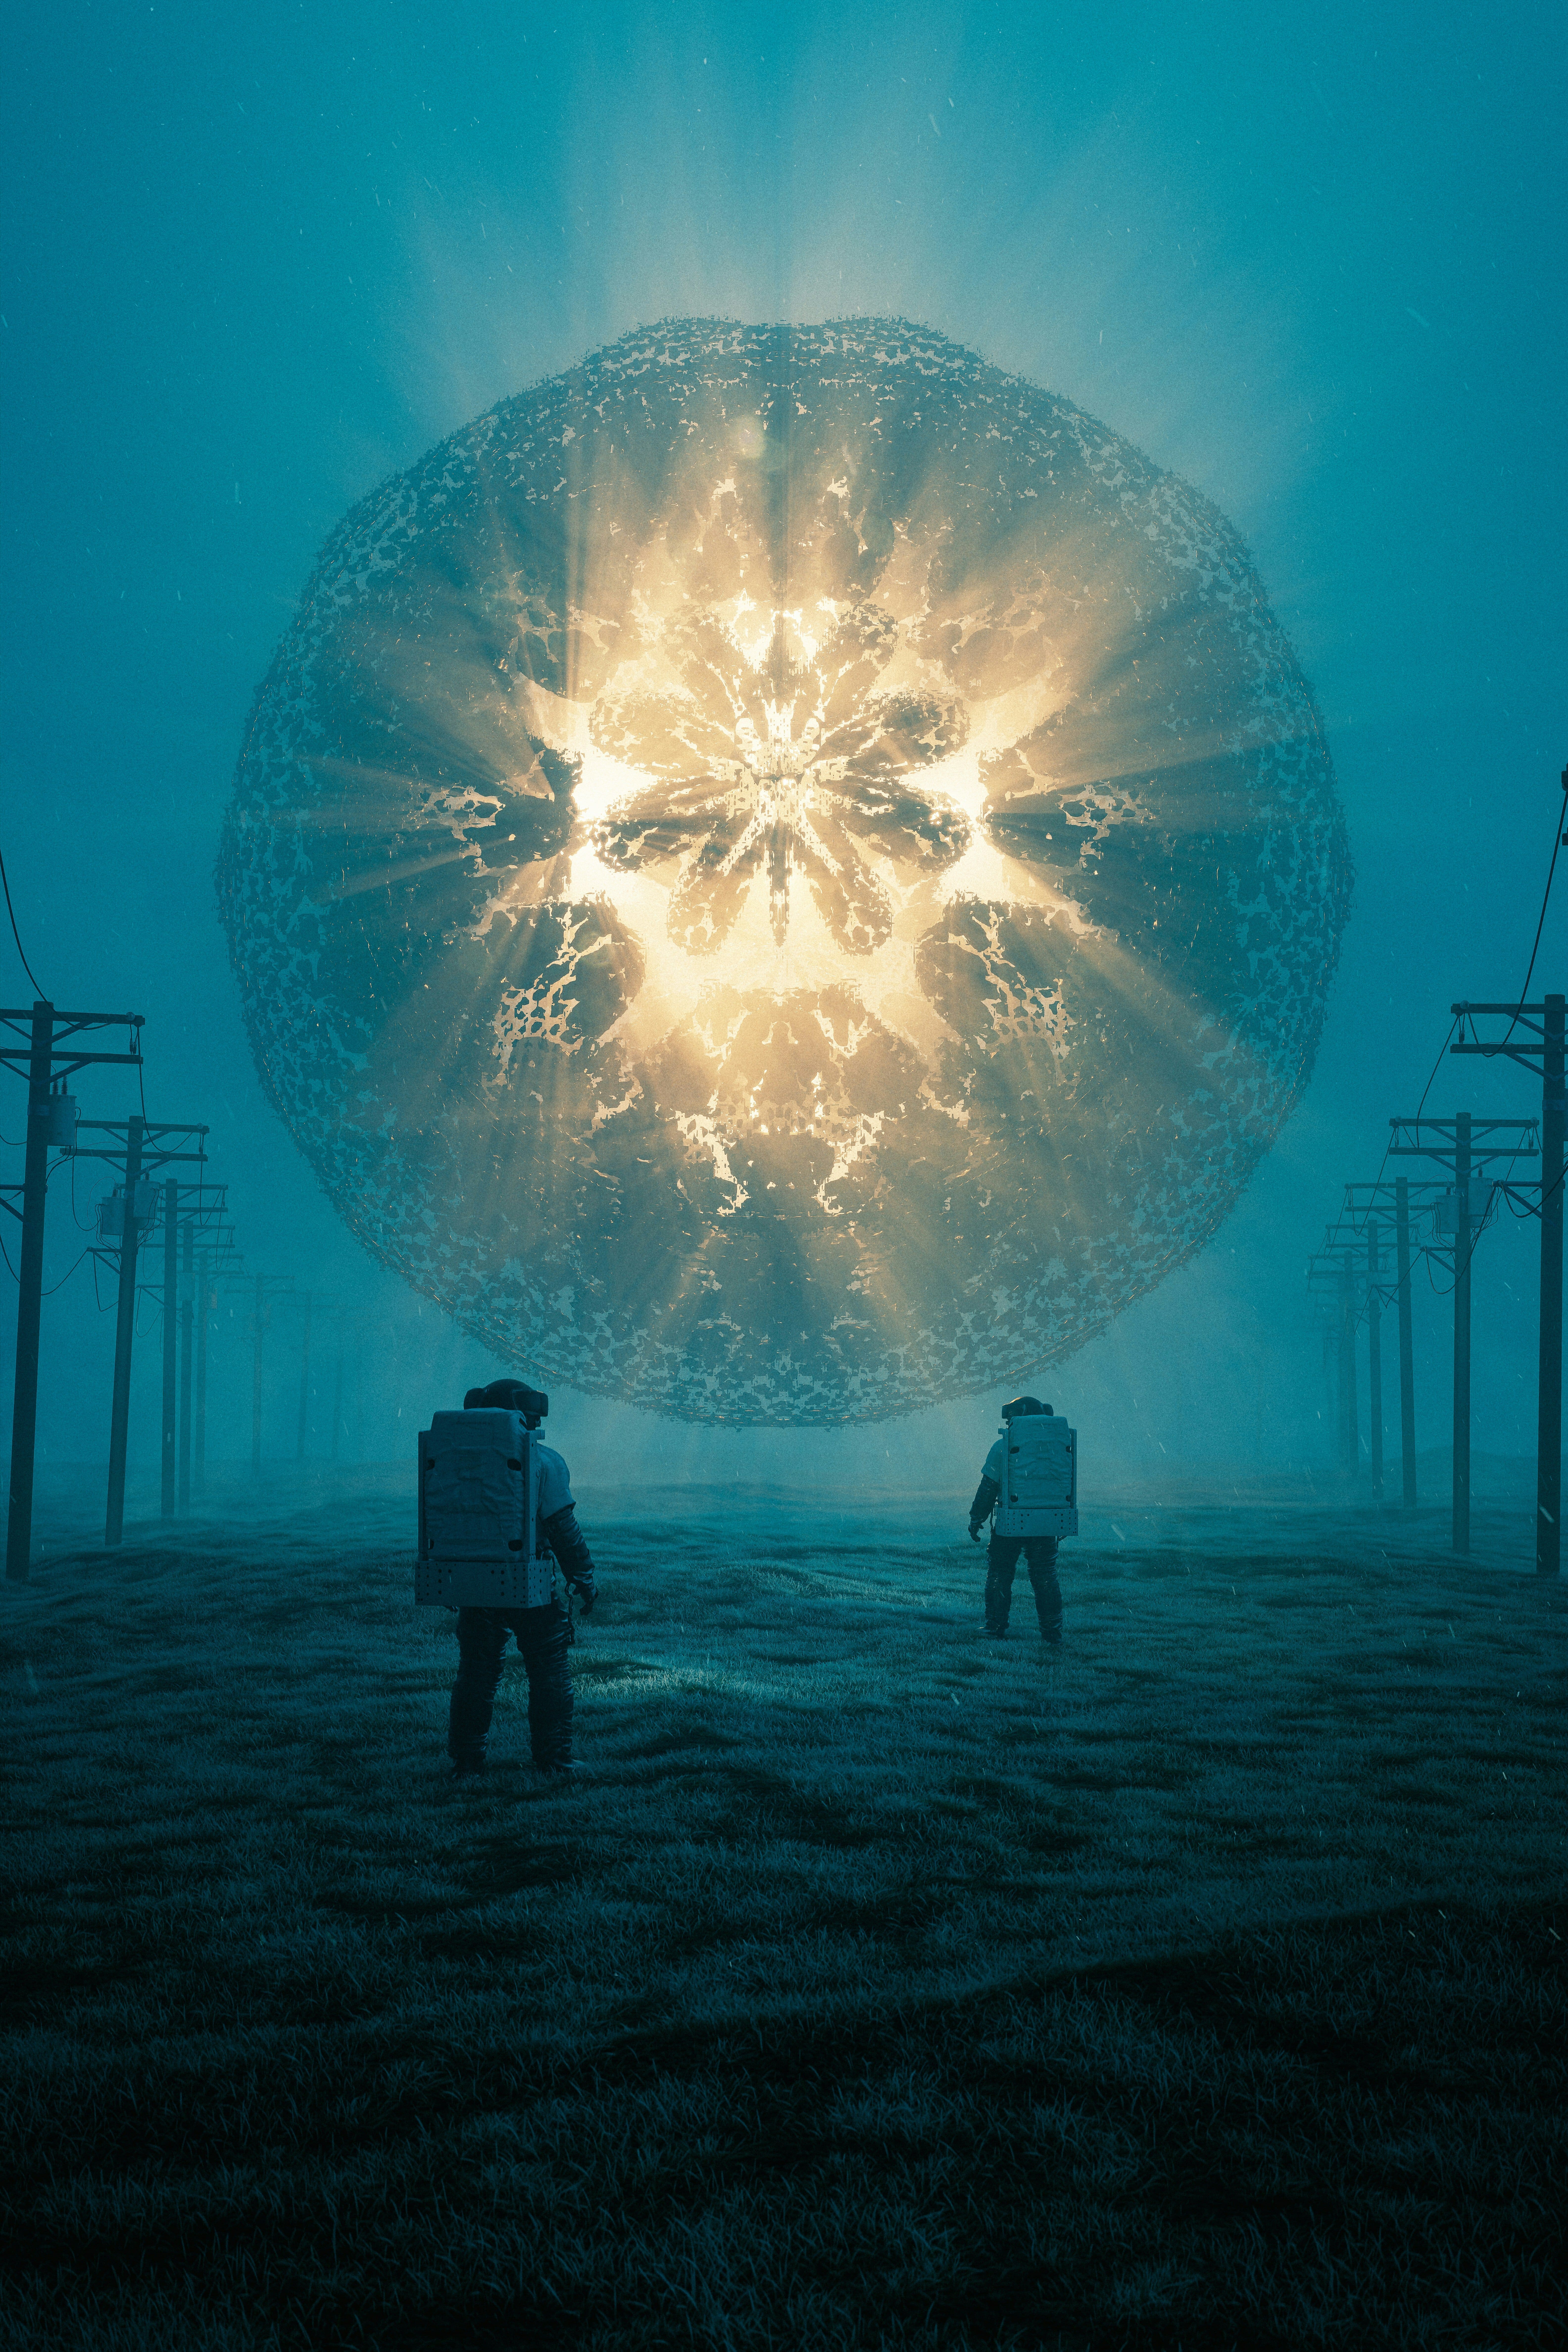 two people standing in a field with a large explosion